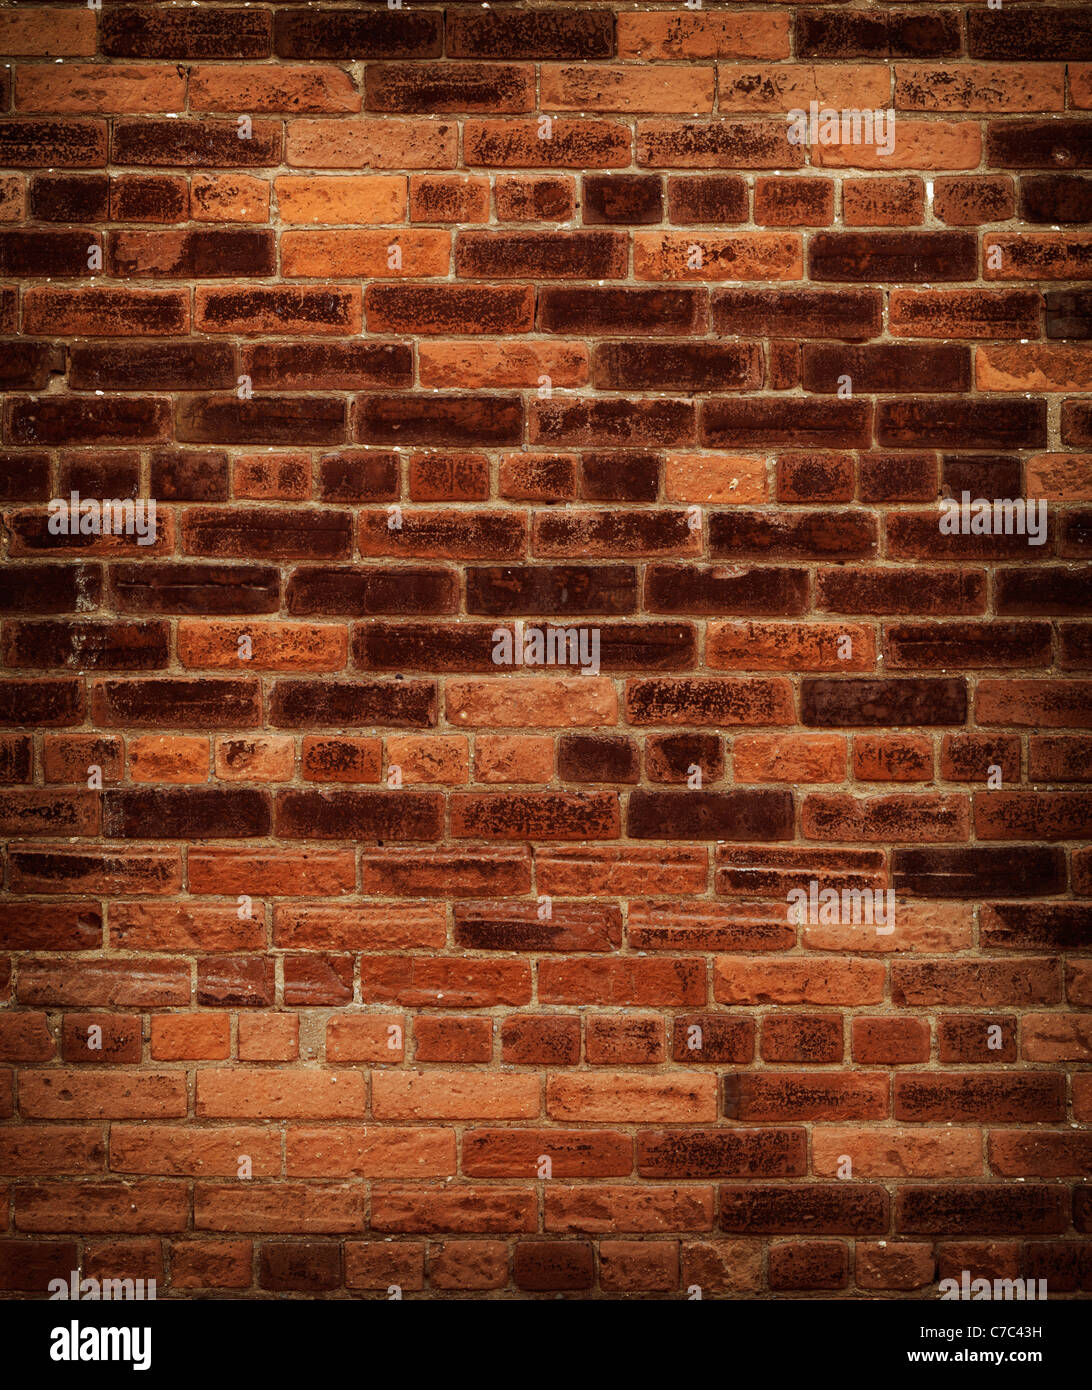 Old red brick wall texture background. High resolution high quality photo. Stock Photo